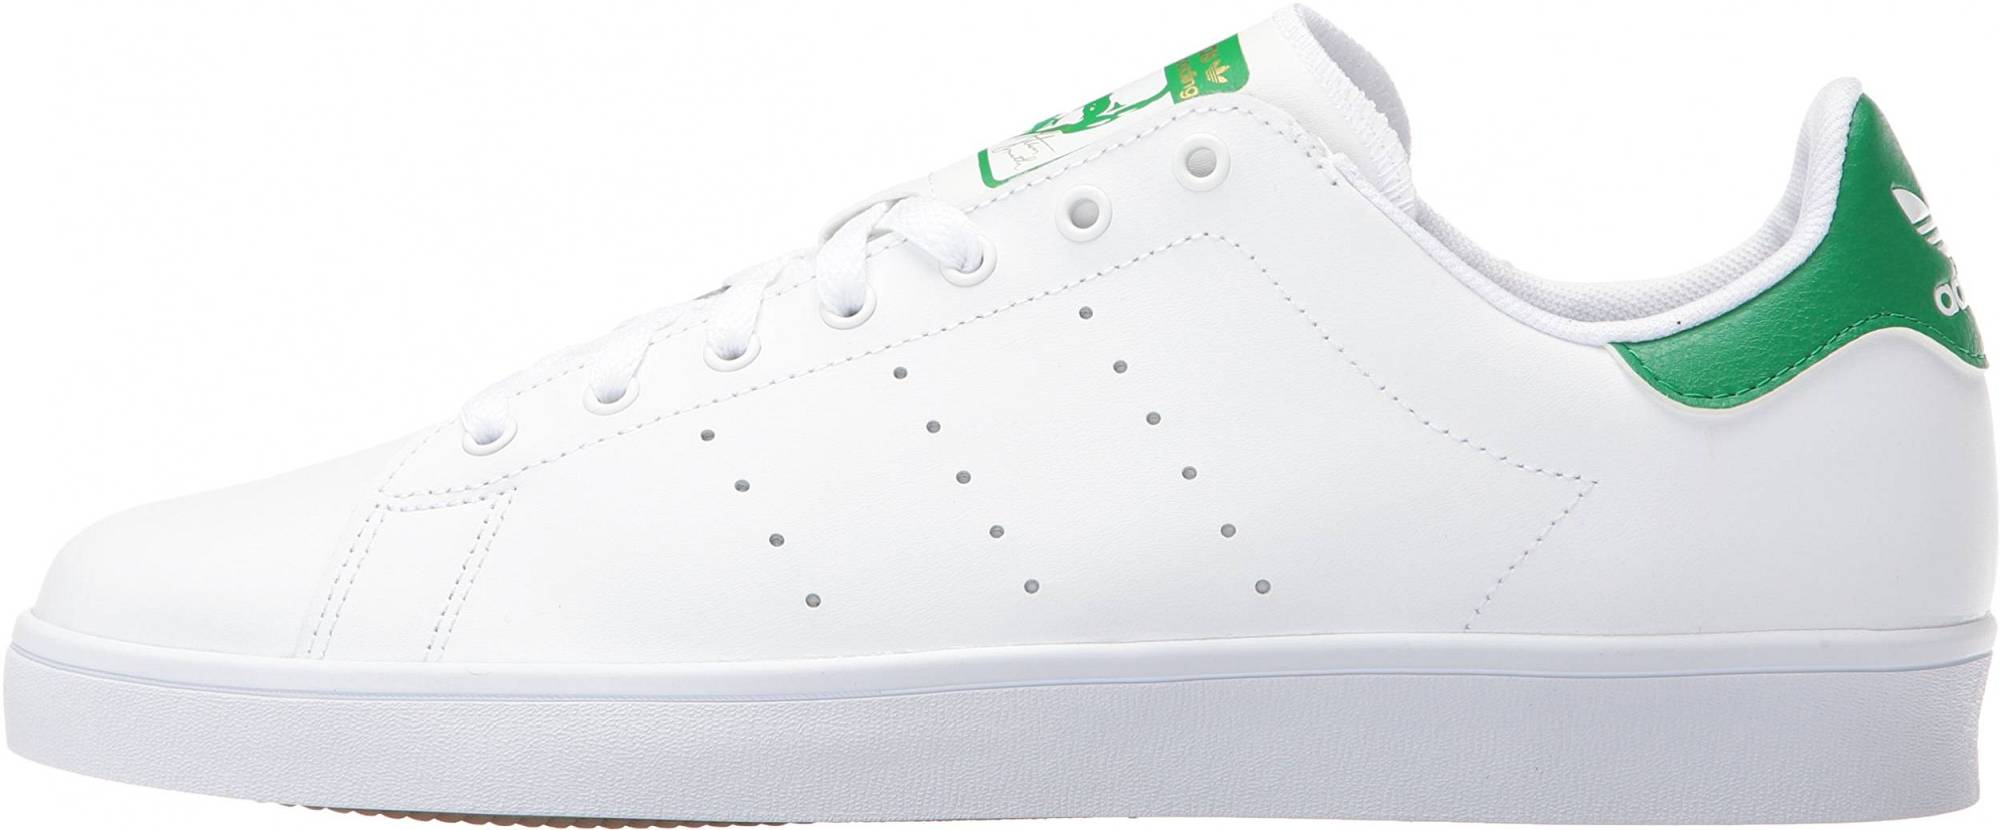 Adidas Stan Smith Vulc Shoes Reviews & Reasons To Buy